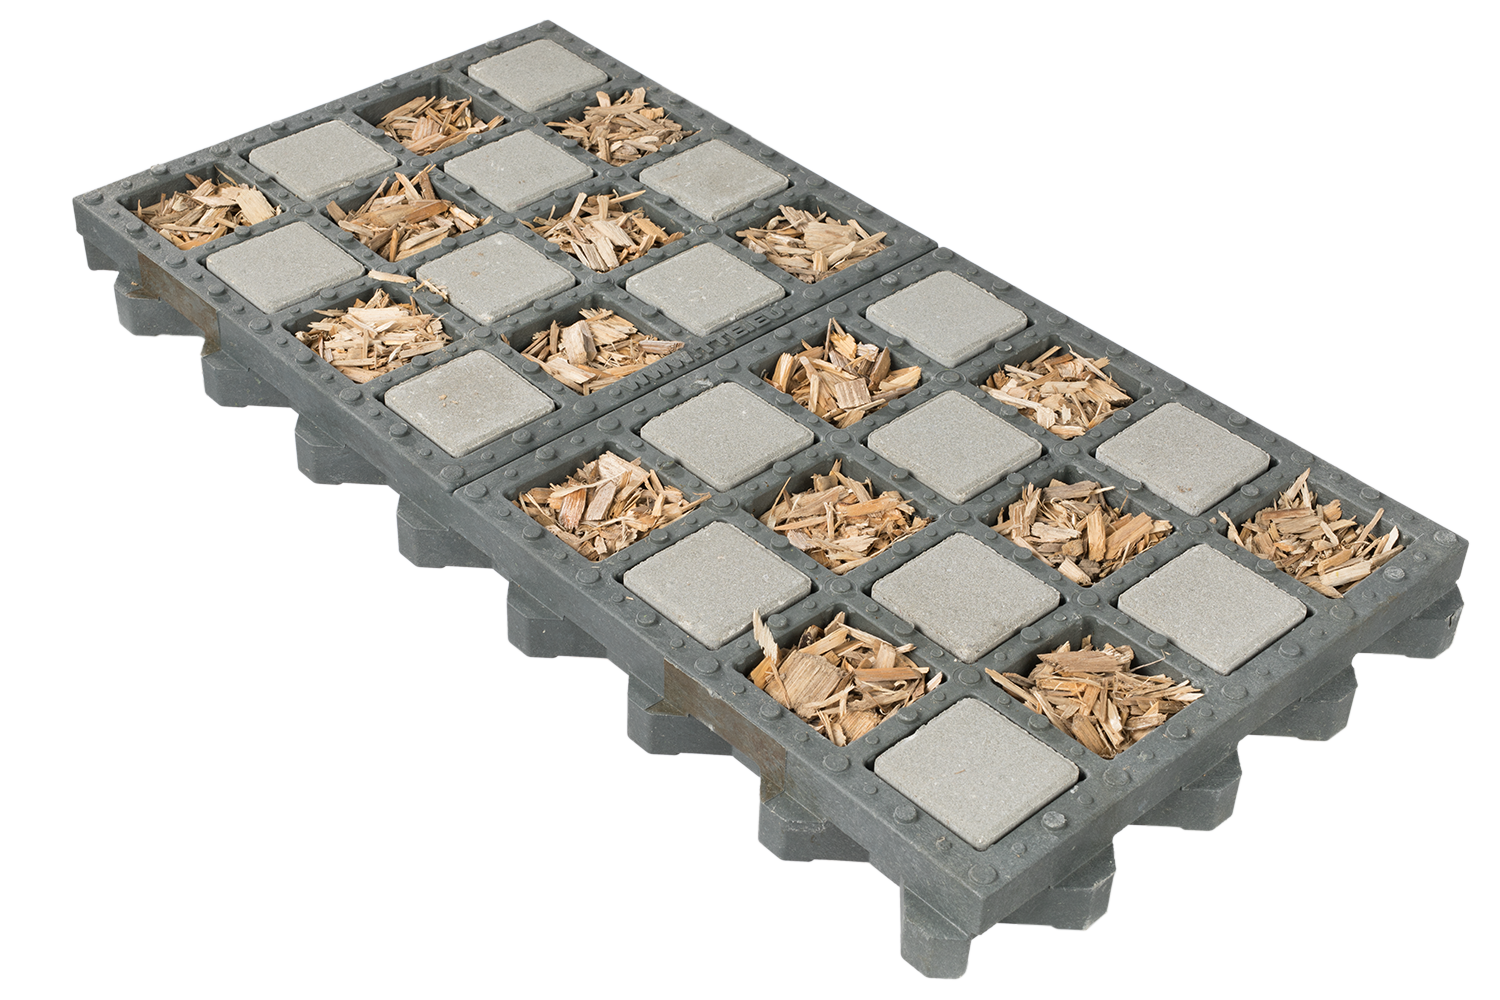 TTE® chessboard with pavers and wood chips